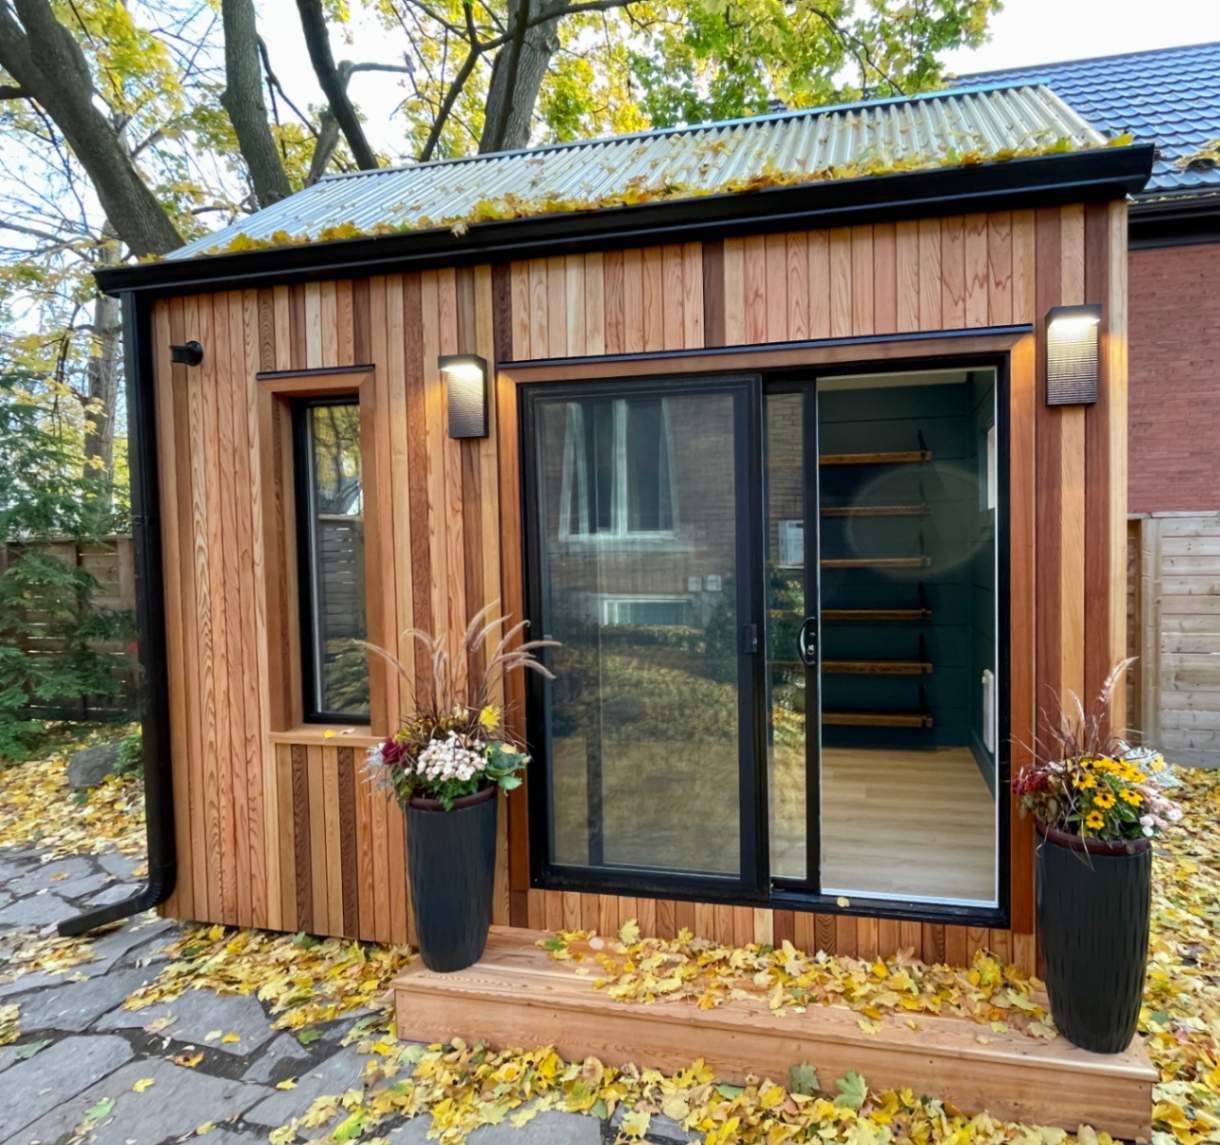 Front view of 8’ x 13' Mini Oban Cabin located in Kitchener, Ontario – Summerwood Products